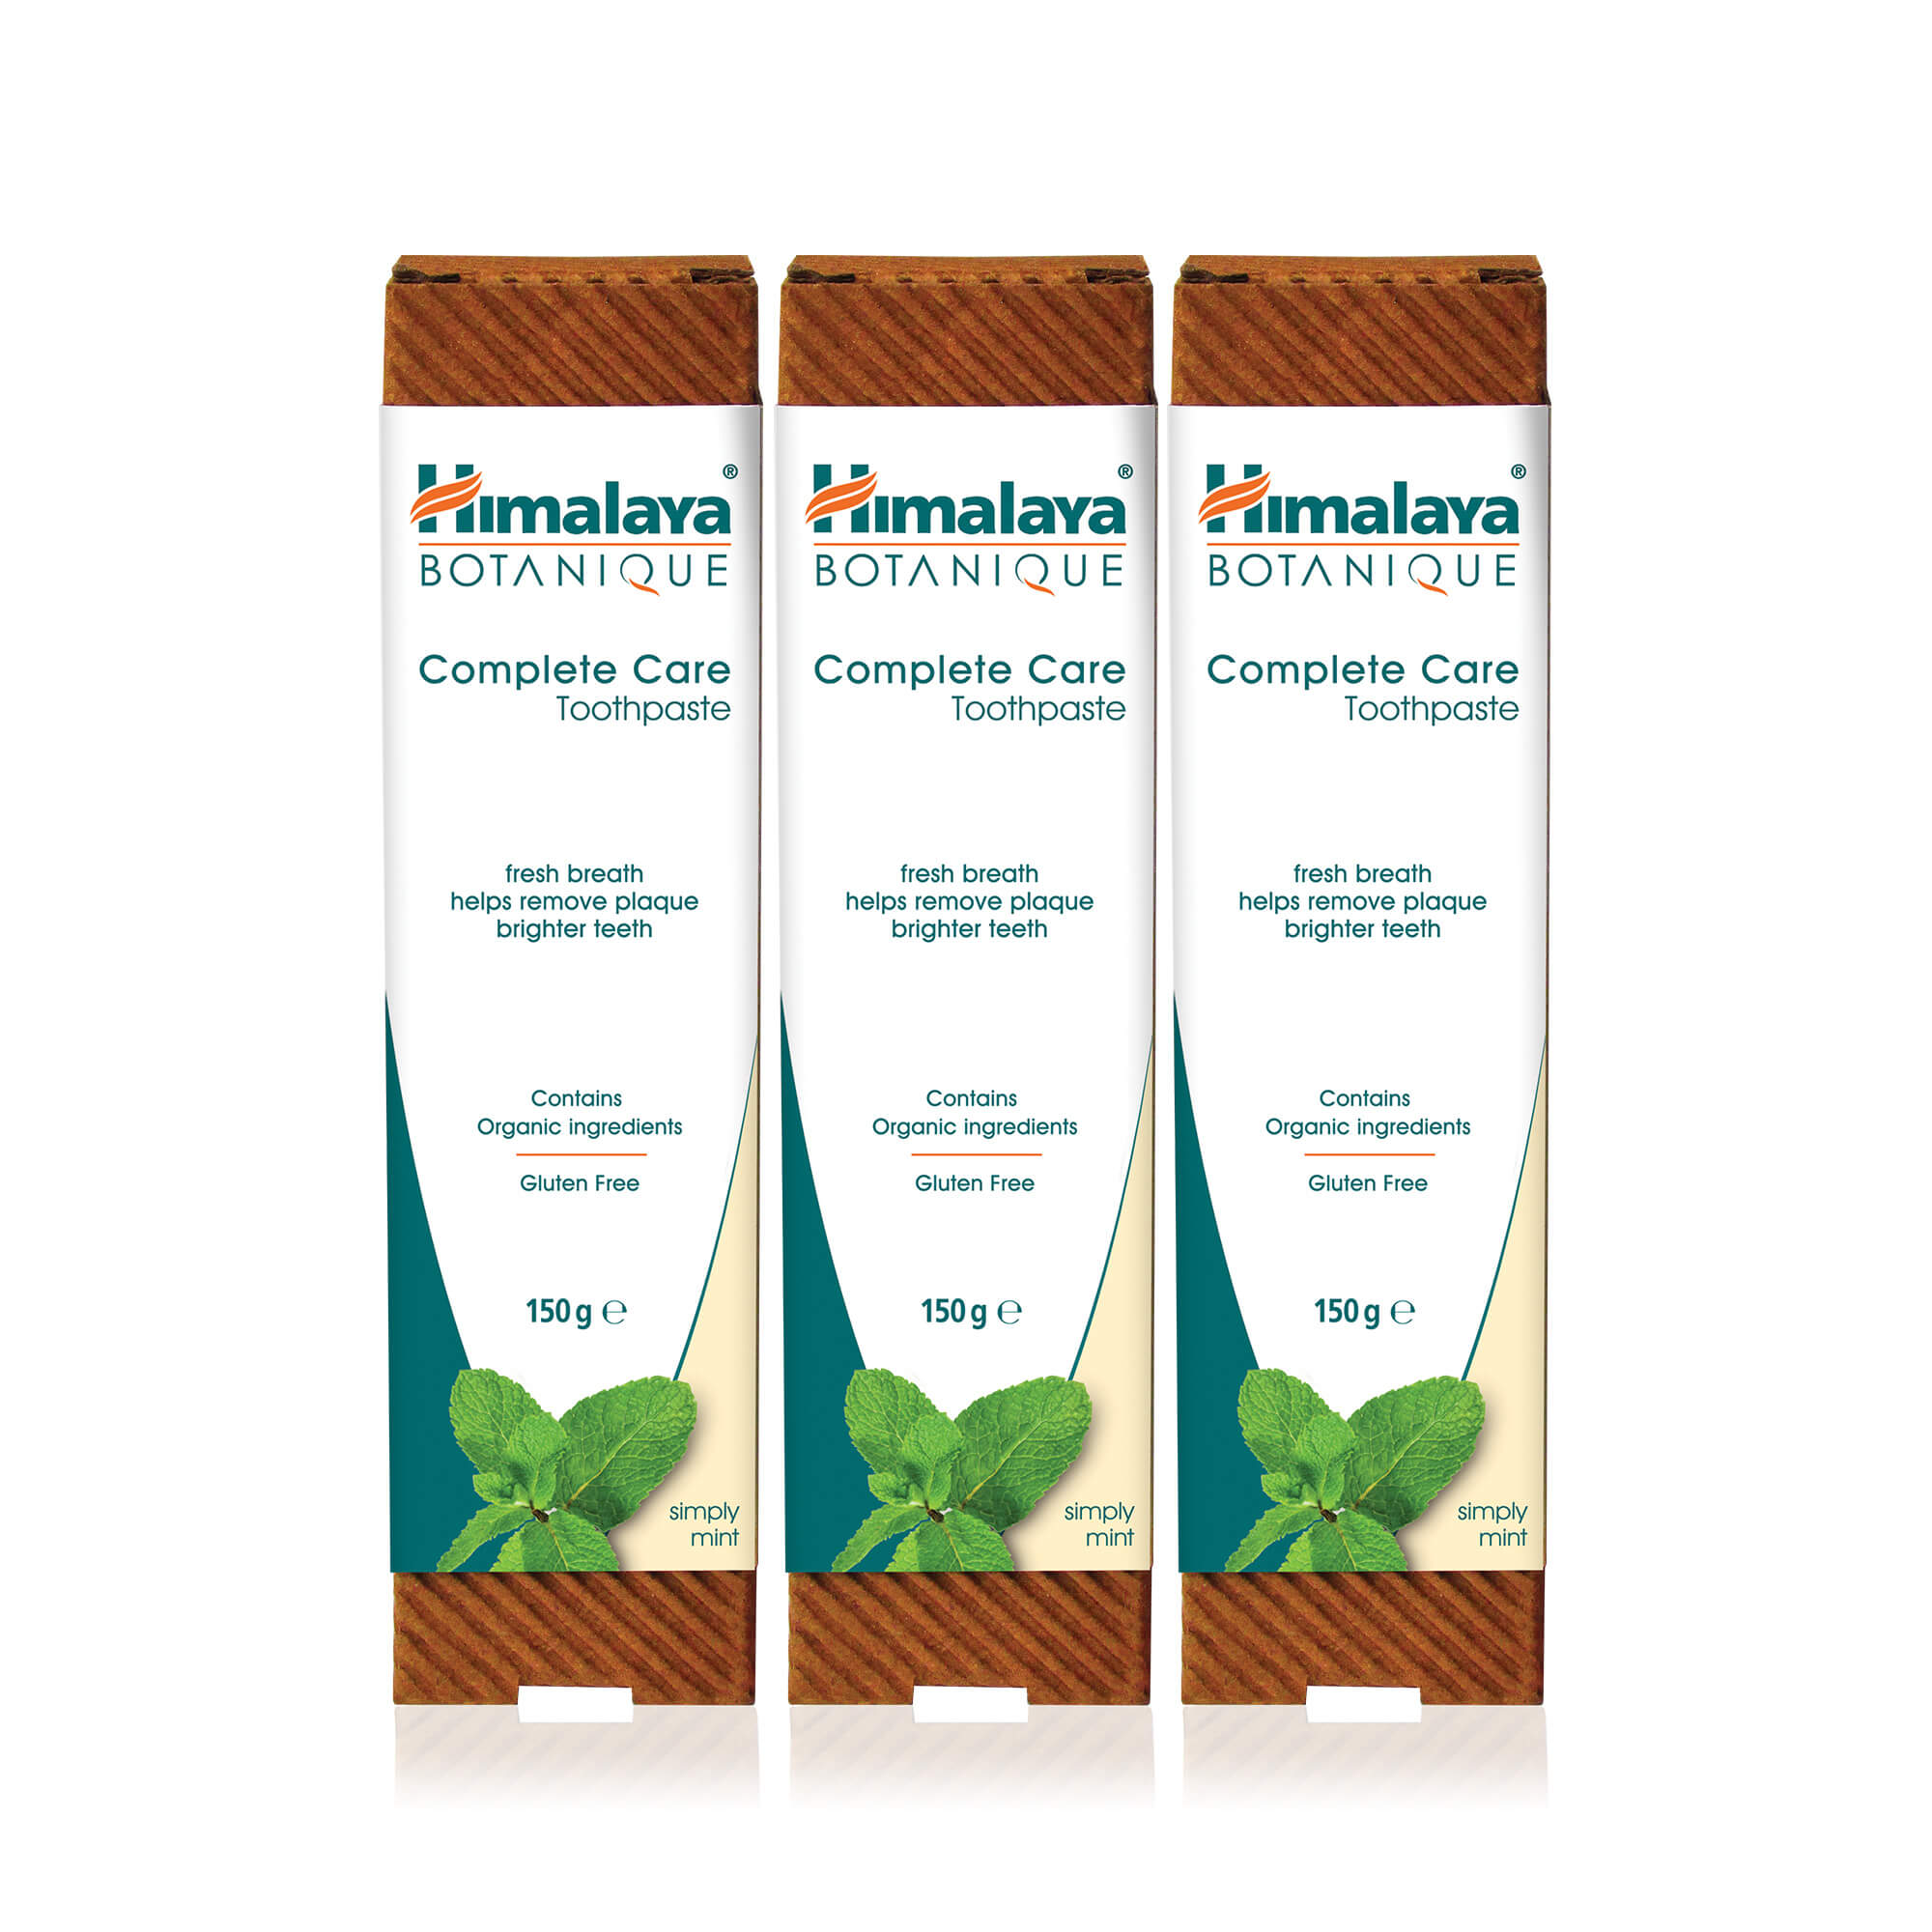 Himalaya BOTANIQUE Complete Care Toothpaste - Simply Mint - 150g (Pack of 3)